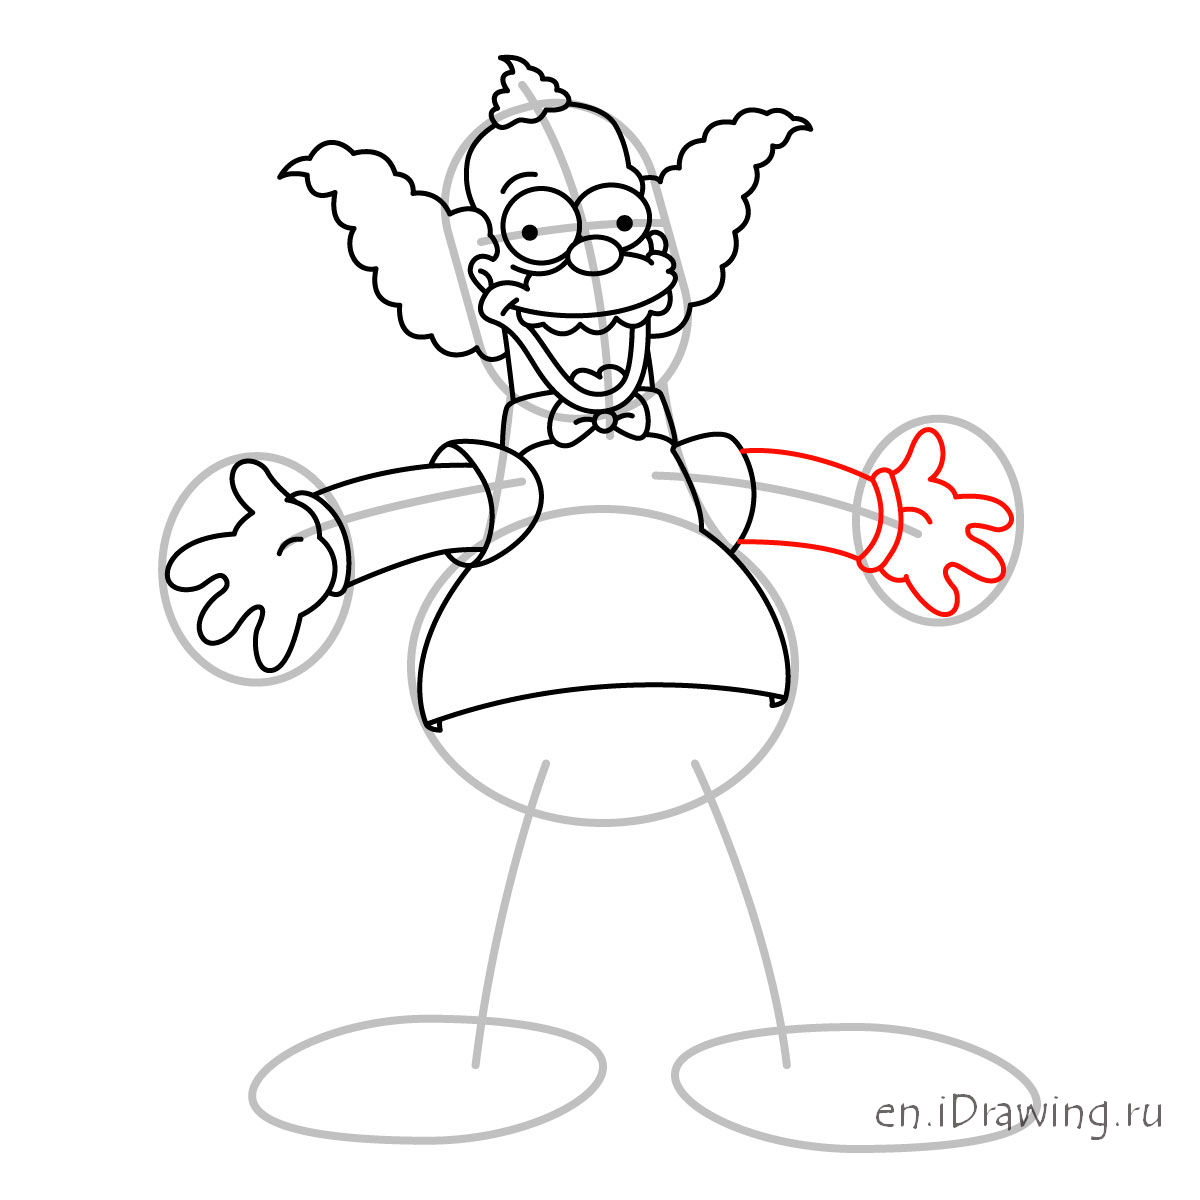 Krusty The Clown Drawing At Getdrawings Free Download Sketch Coloring Page.